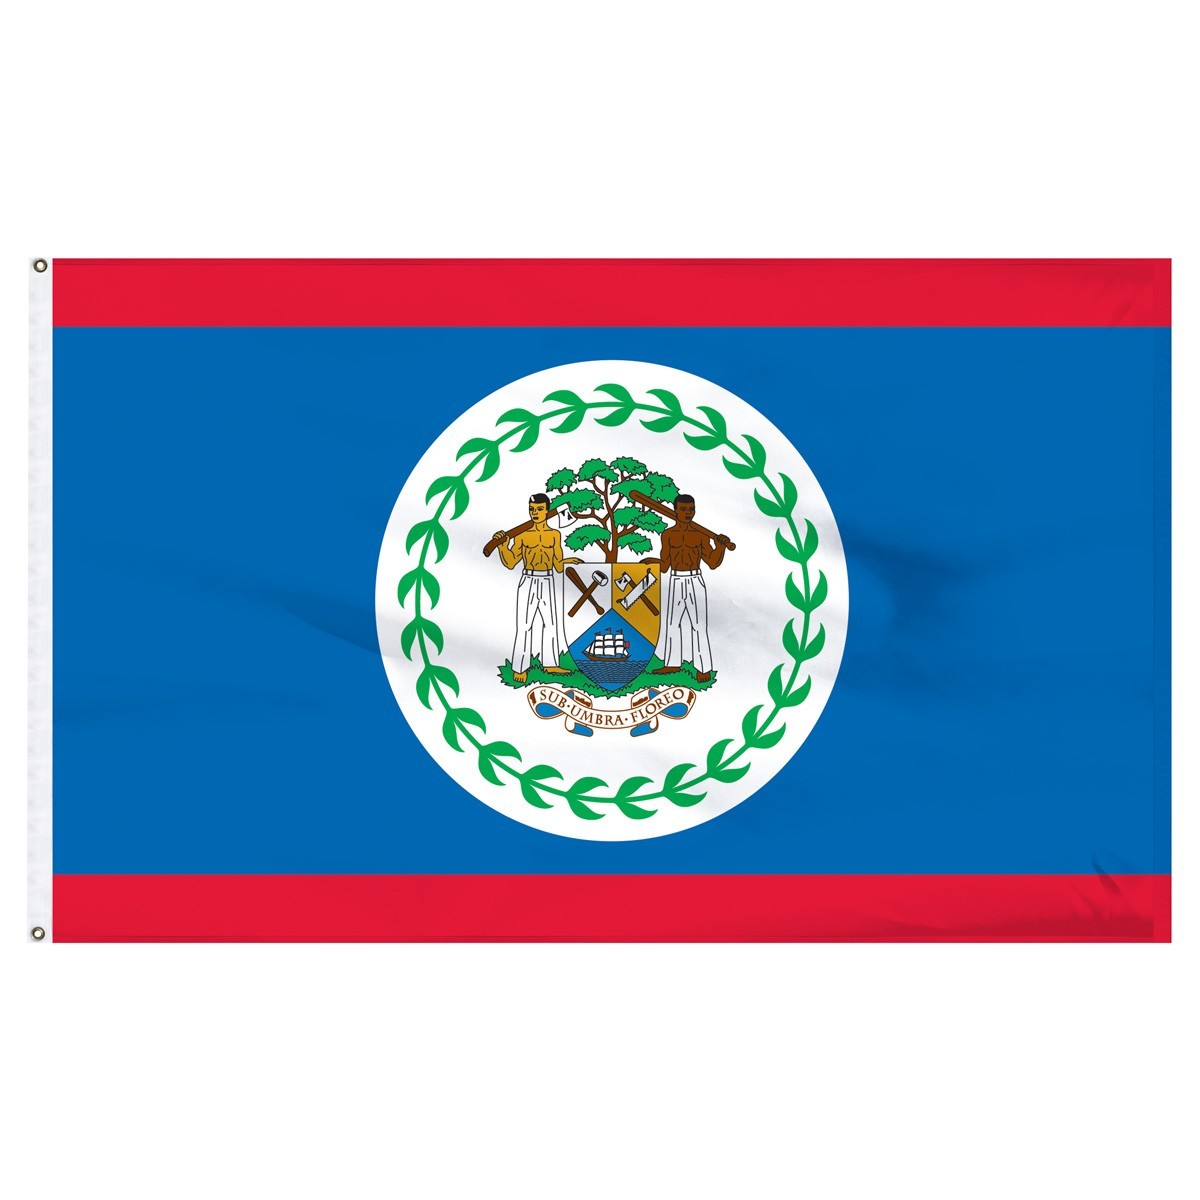 Shop for Belize international flags for sale with 1-800 Flags